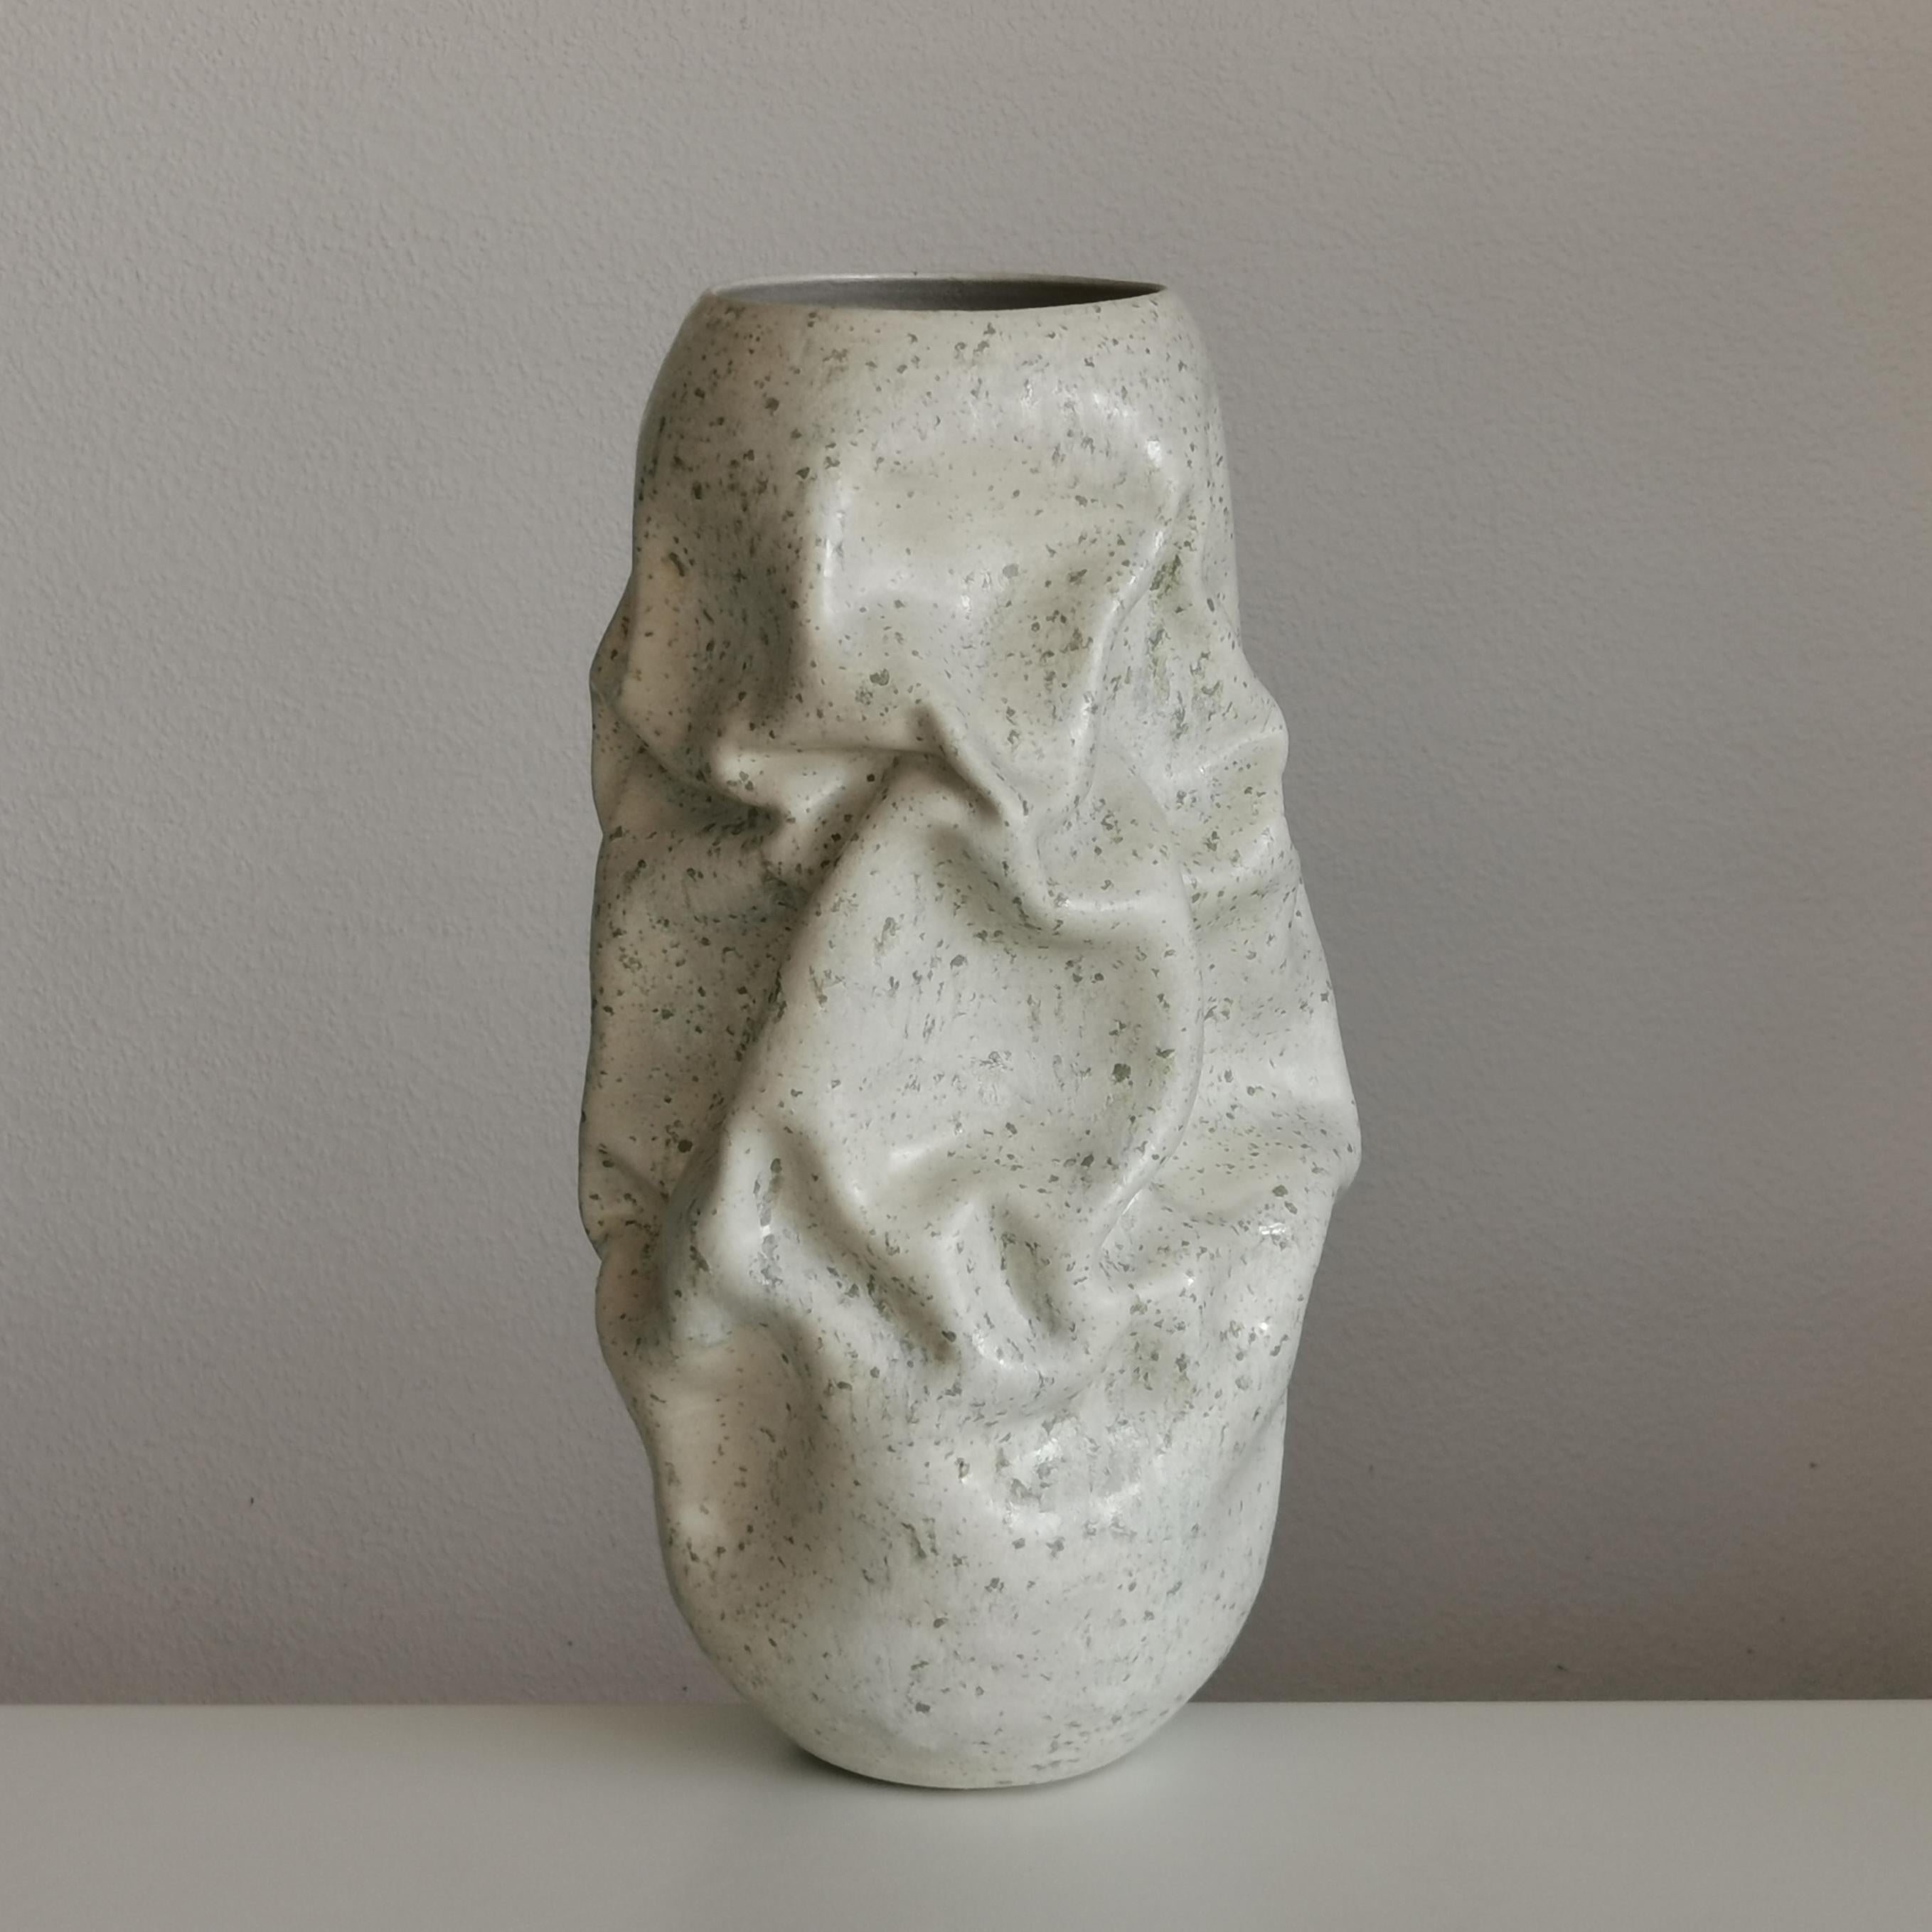 Medium Tall White Crumpled Form with Green Crystals, Vessel N.128, Interior Sculpture, Objet D'Art

Vessel from ceramic artist Nicholas Arroyave-Portela.

White St.Thomas clay, stoneware glazes, multi fired to cone 6 (1223 degrees)

Made in 2024

48